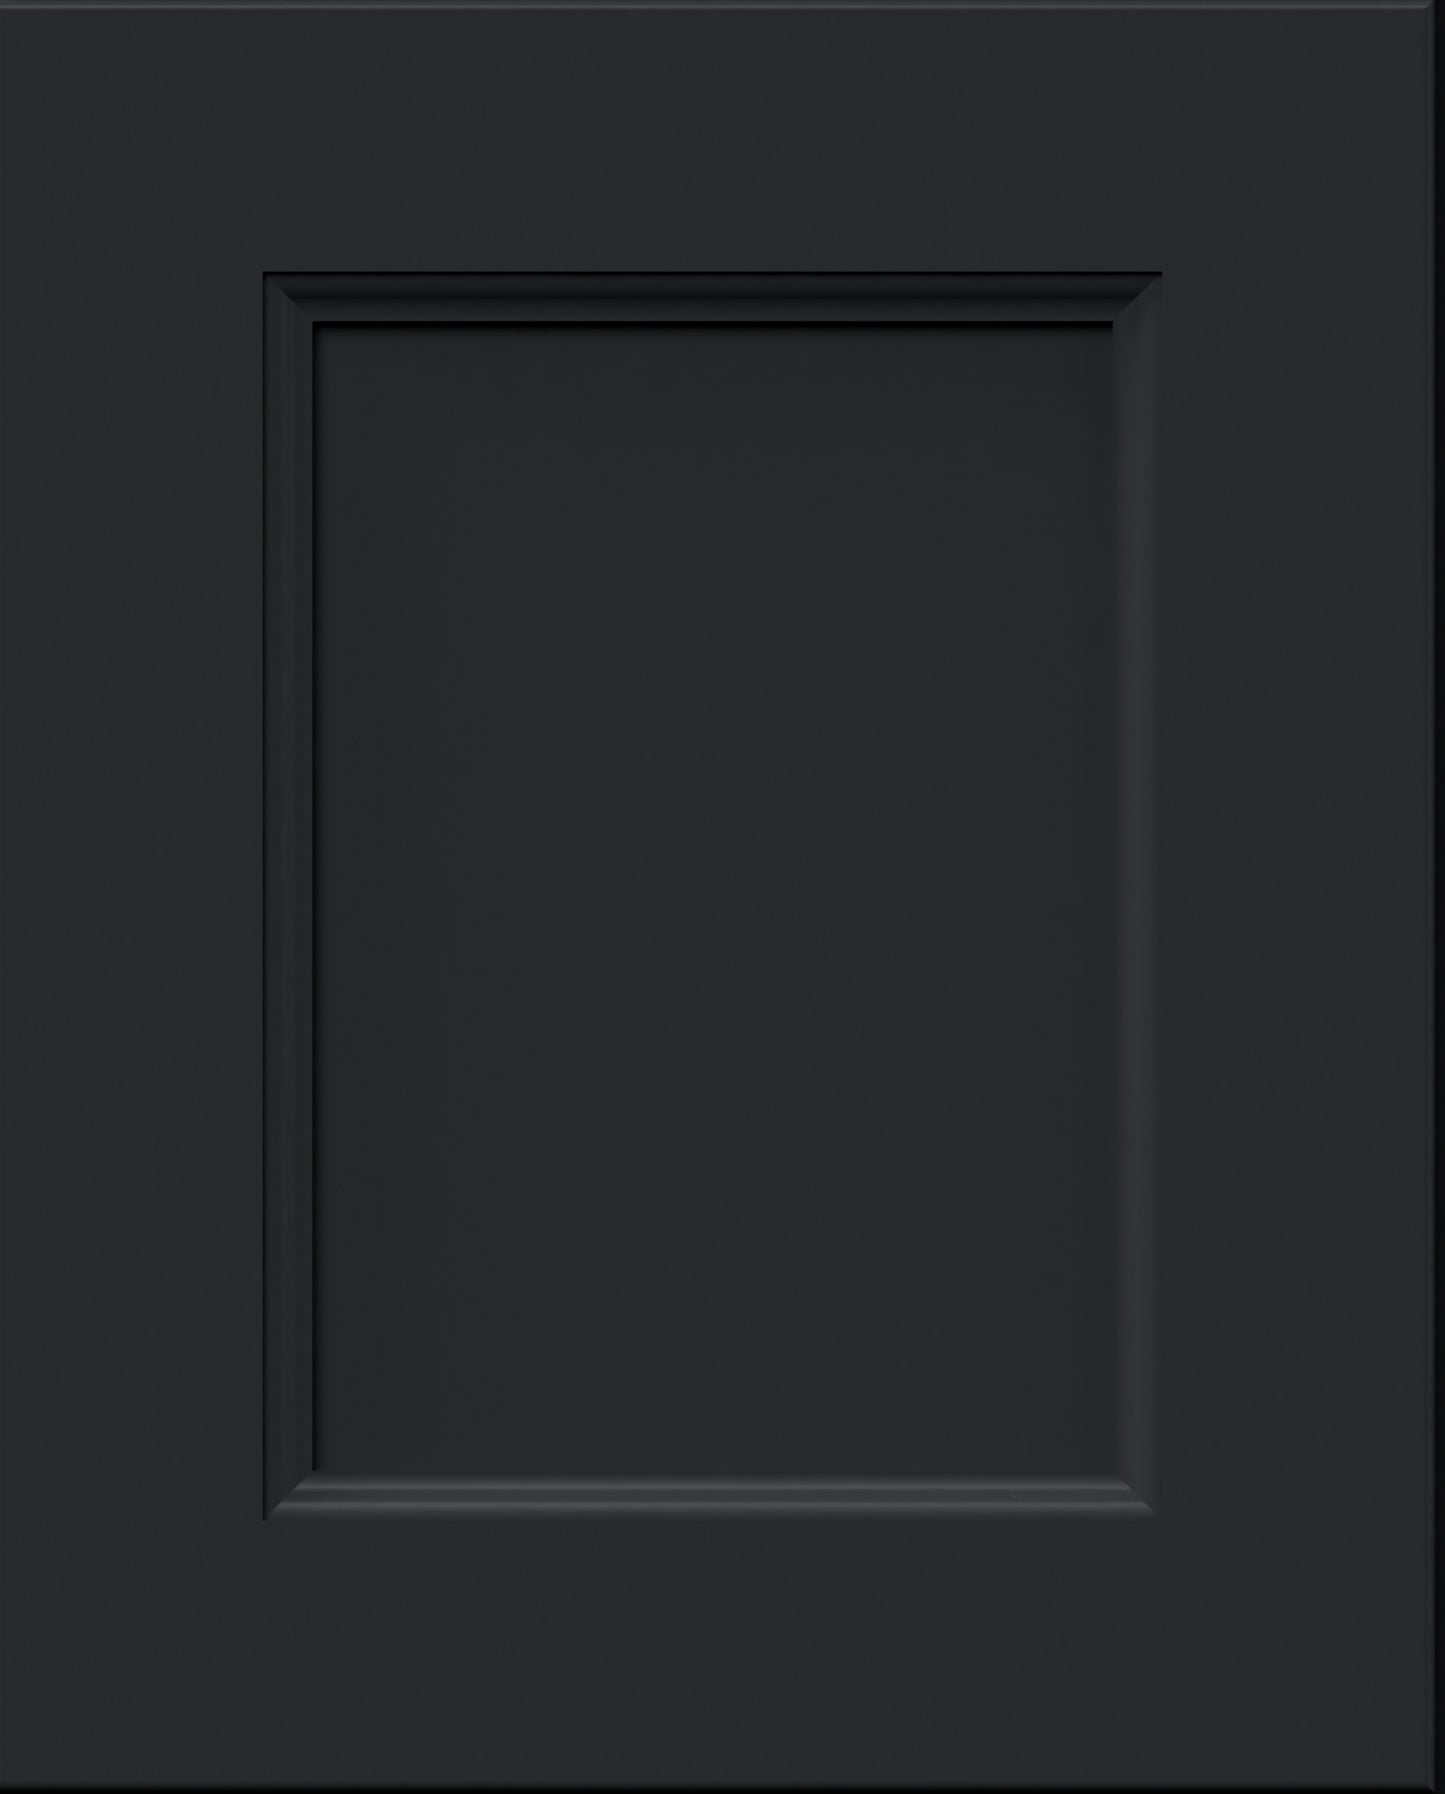 Nexus pitch black small sample door. Recessed cabinet door with inner beveled detail in a black painted finish.